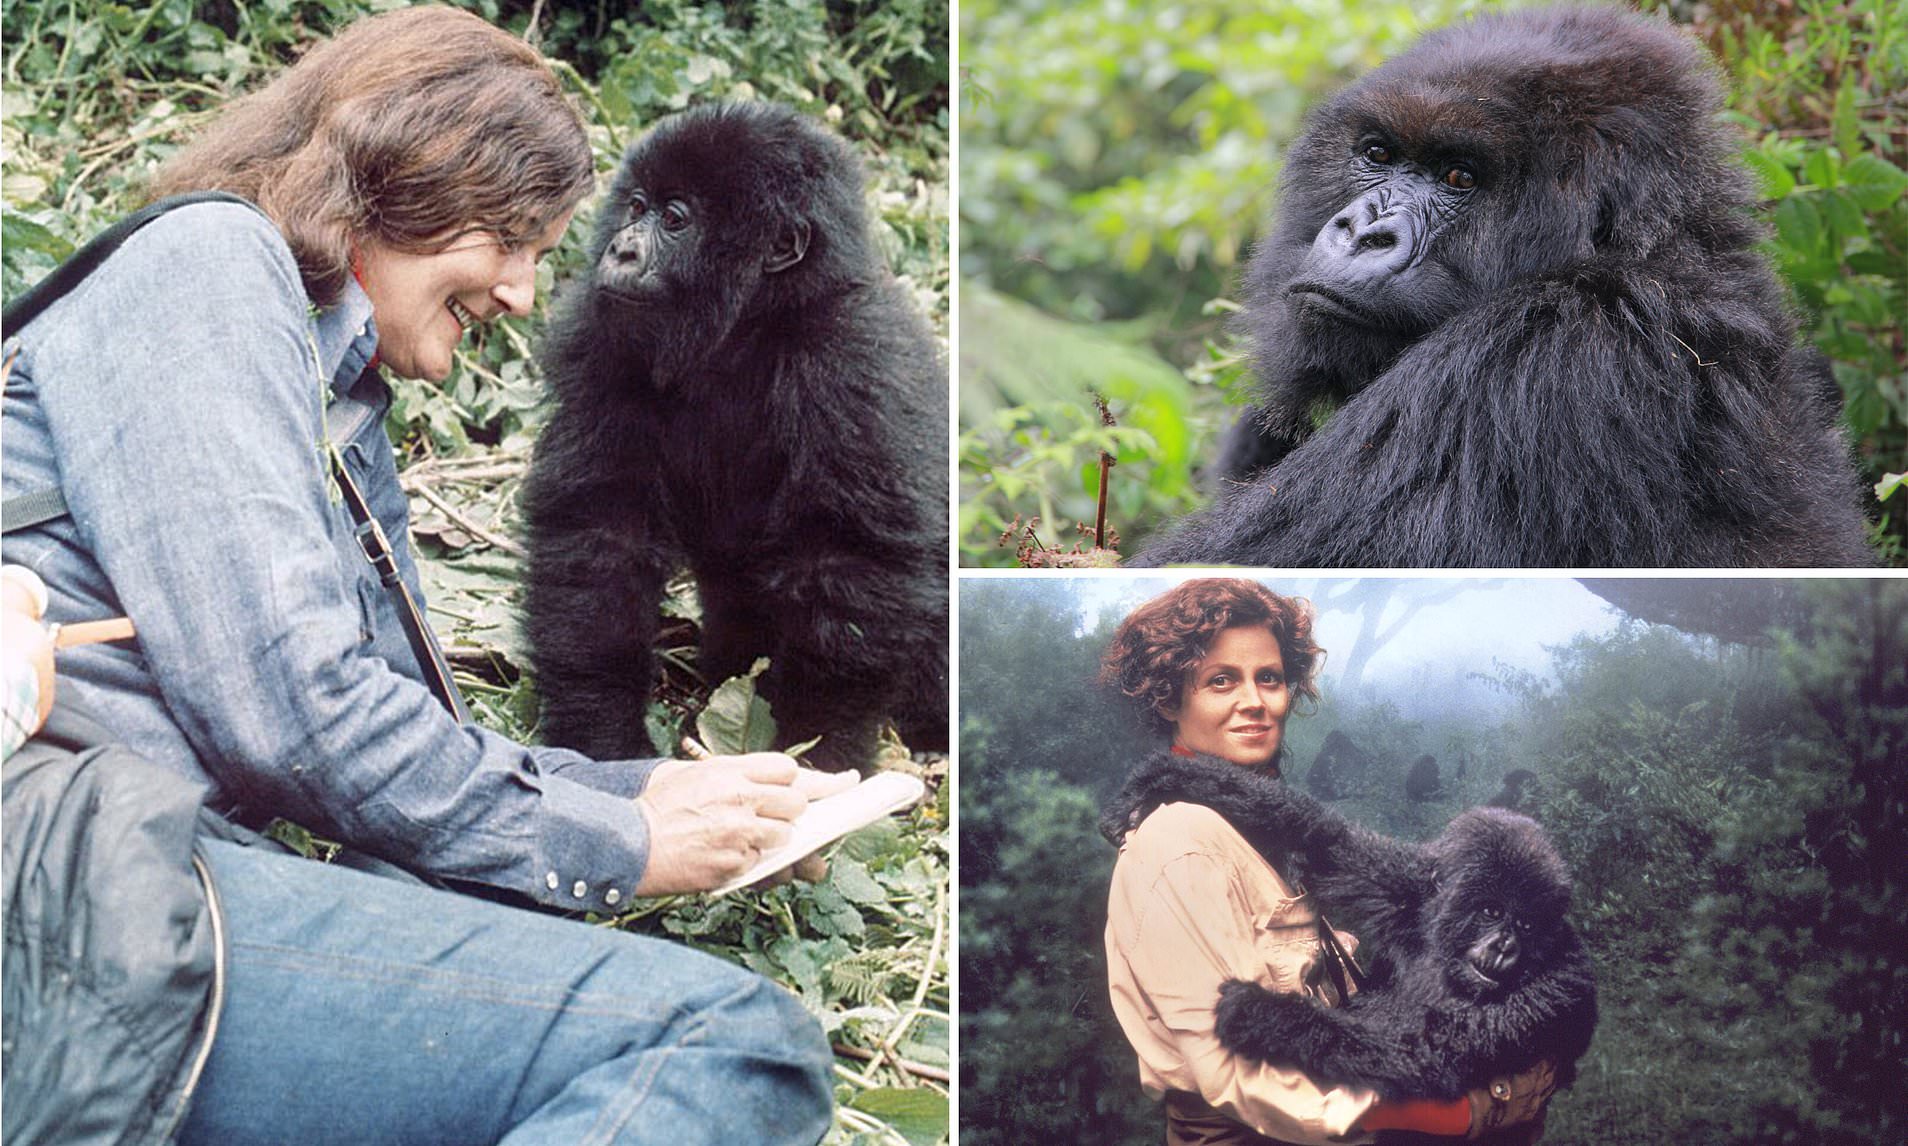 why are mountain gorillas that dian fossey studied not kept in zoos in the united states